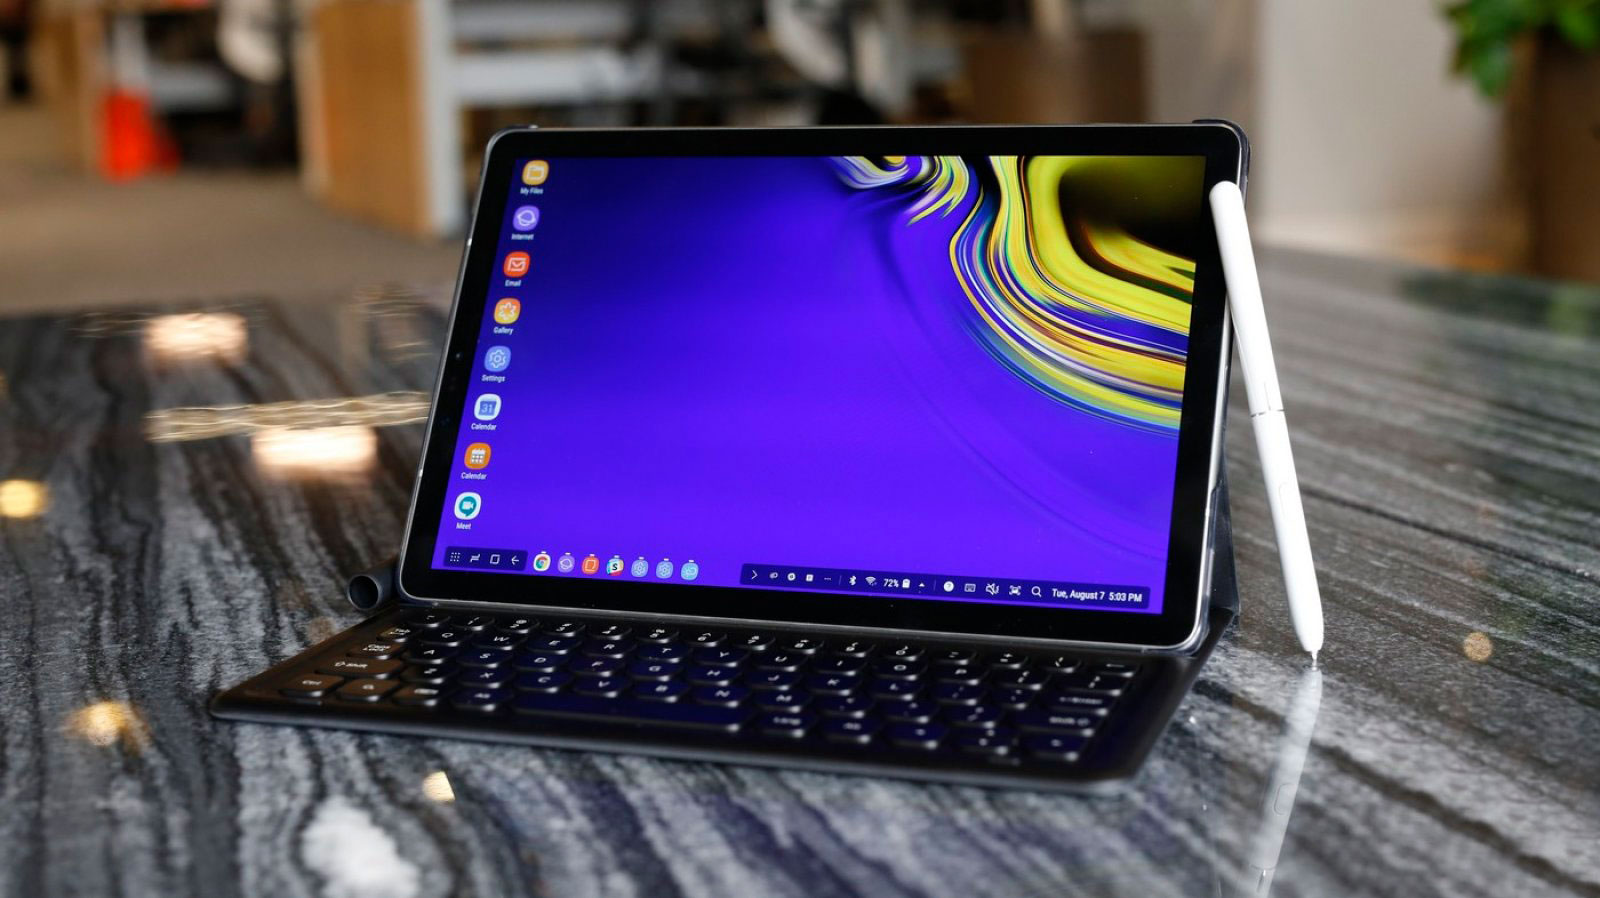 Samsung Galaxy Tab S4 Android 9 Pie